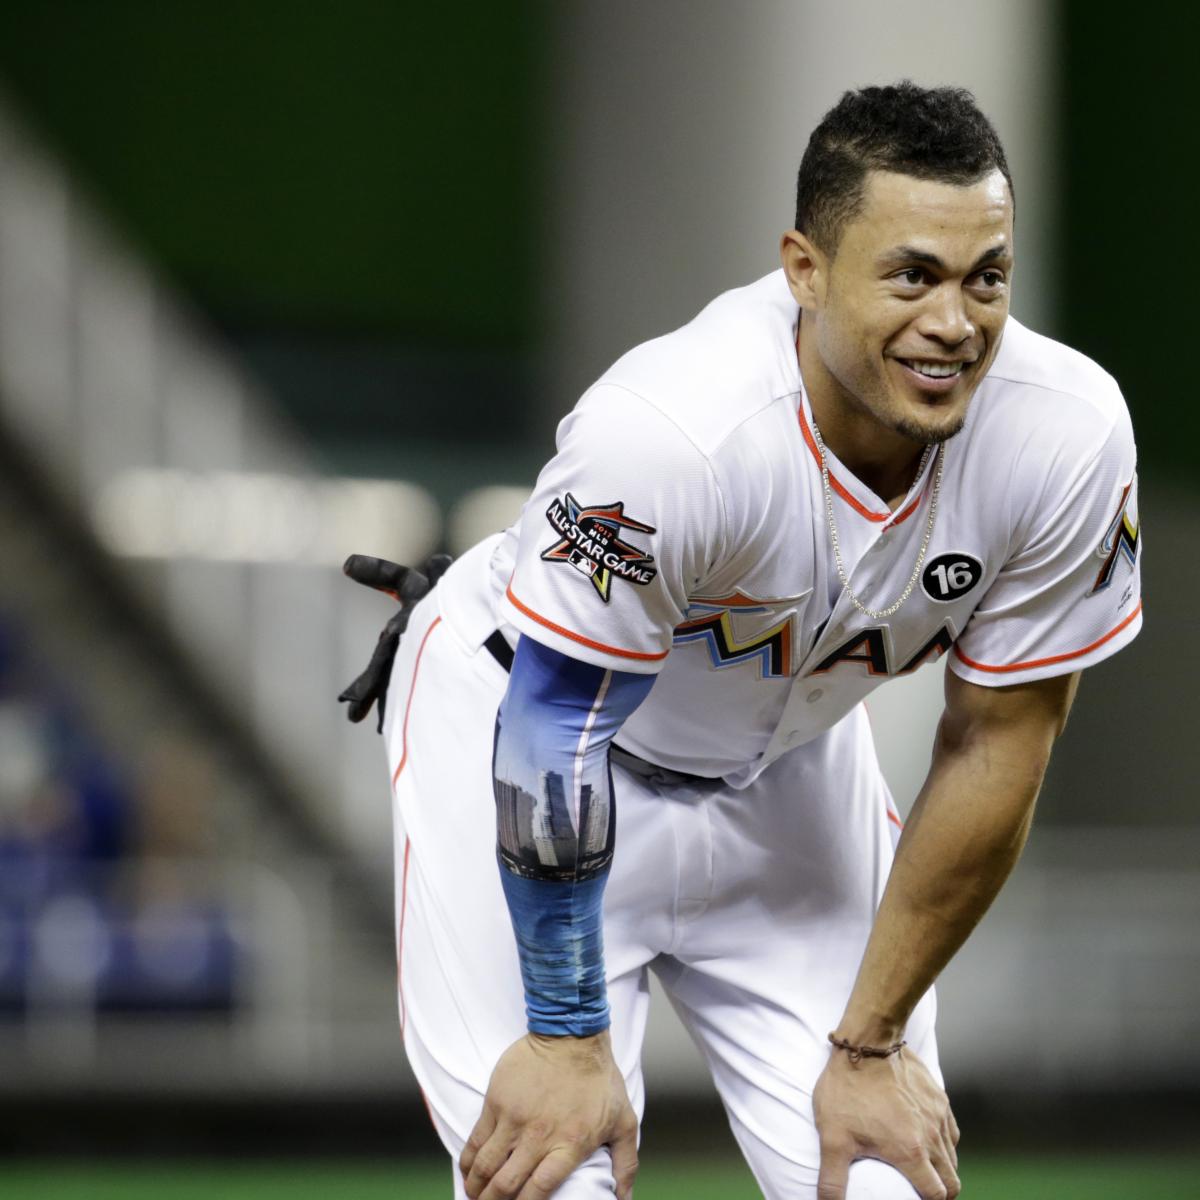 Giants, Cardinals say no trades for NL MVP Giancarlo Stanton – Hartford  Courant